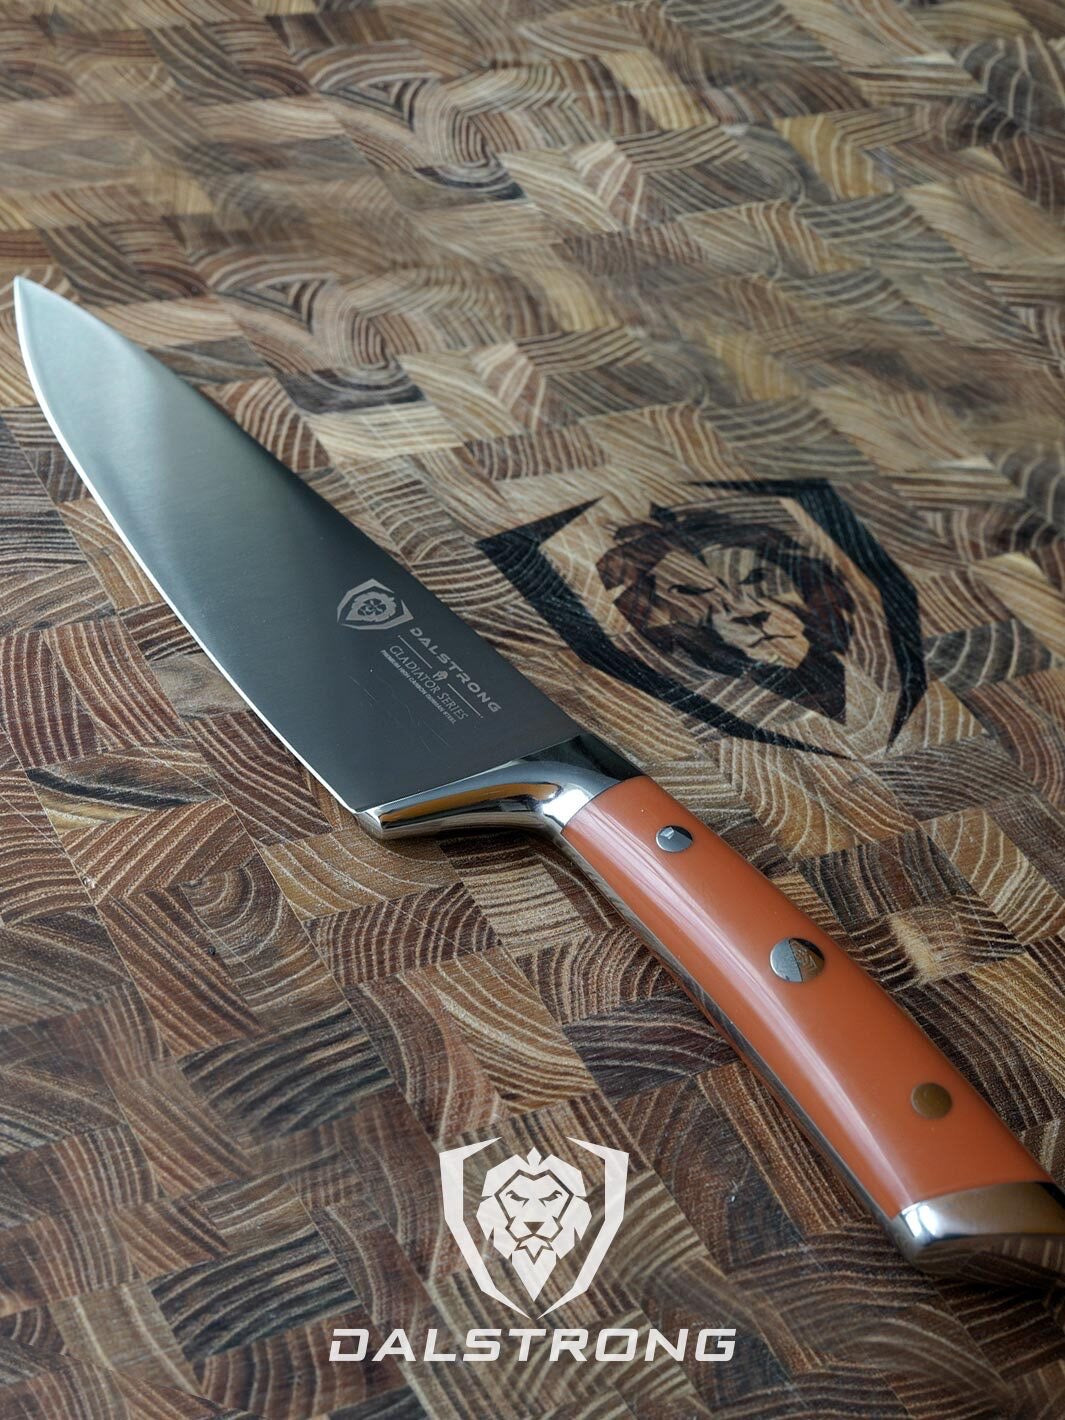 Dalstrong gladiator series 8 inch chef knife with orange handle in top of a dalstrong cutting board.